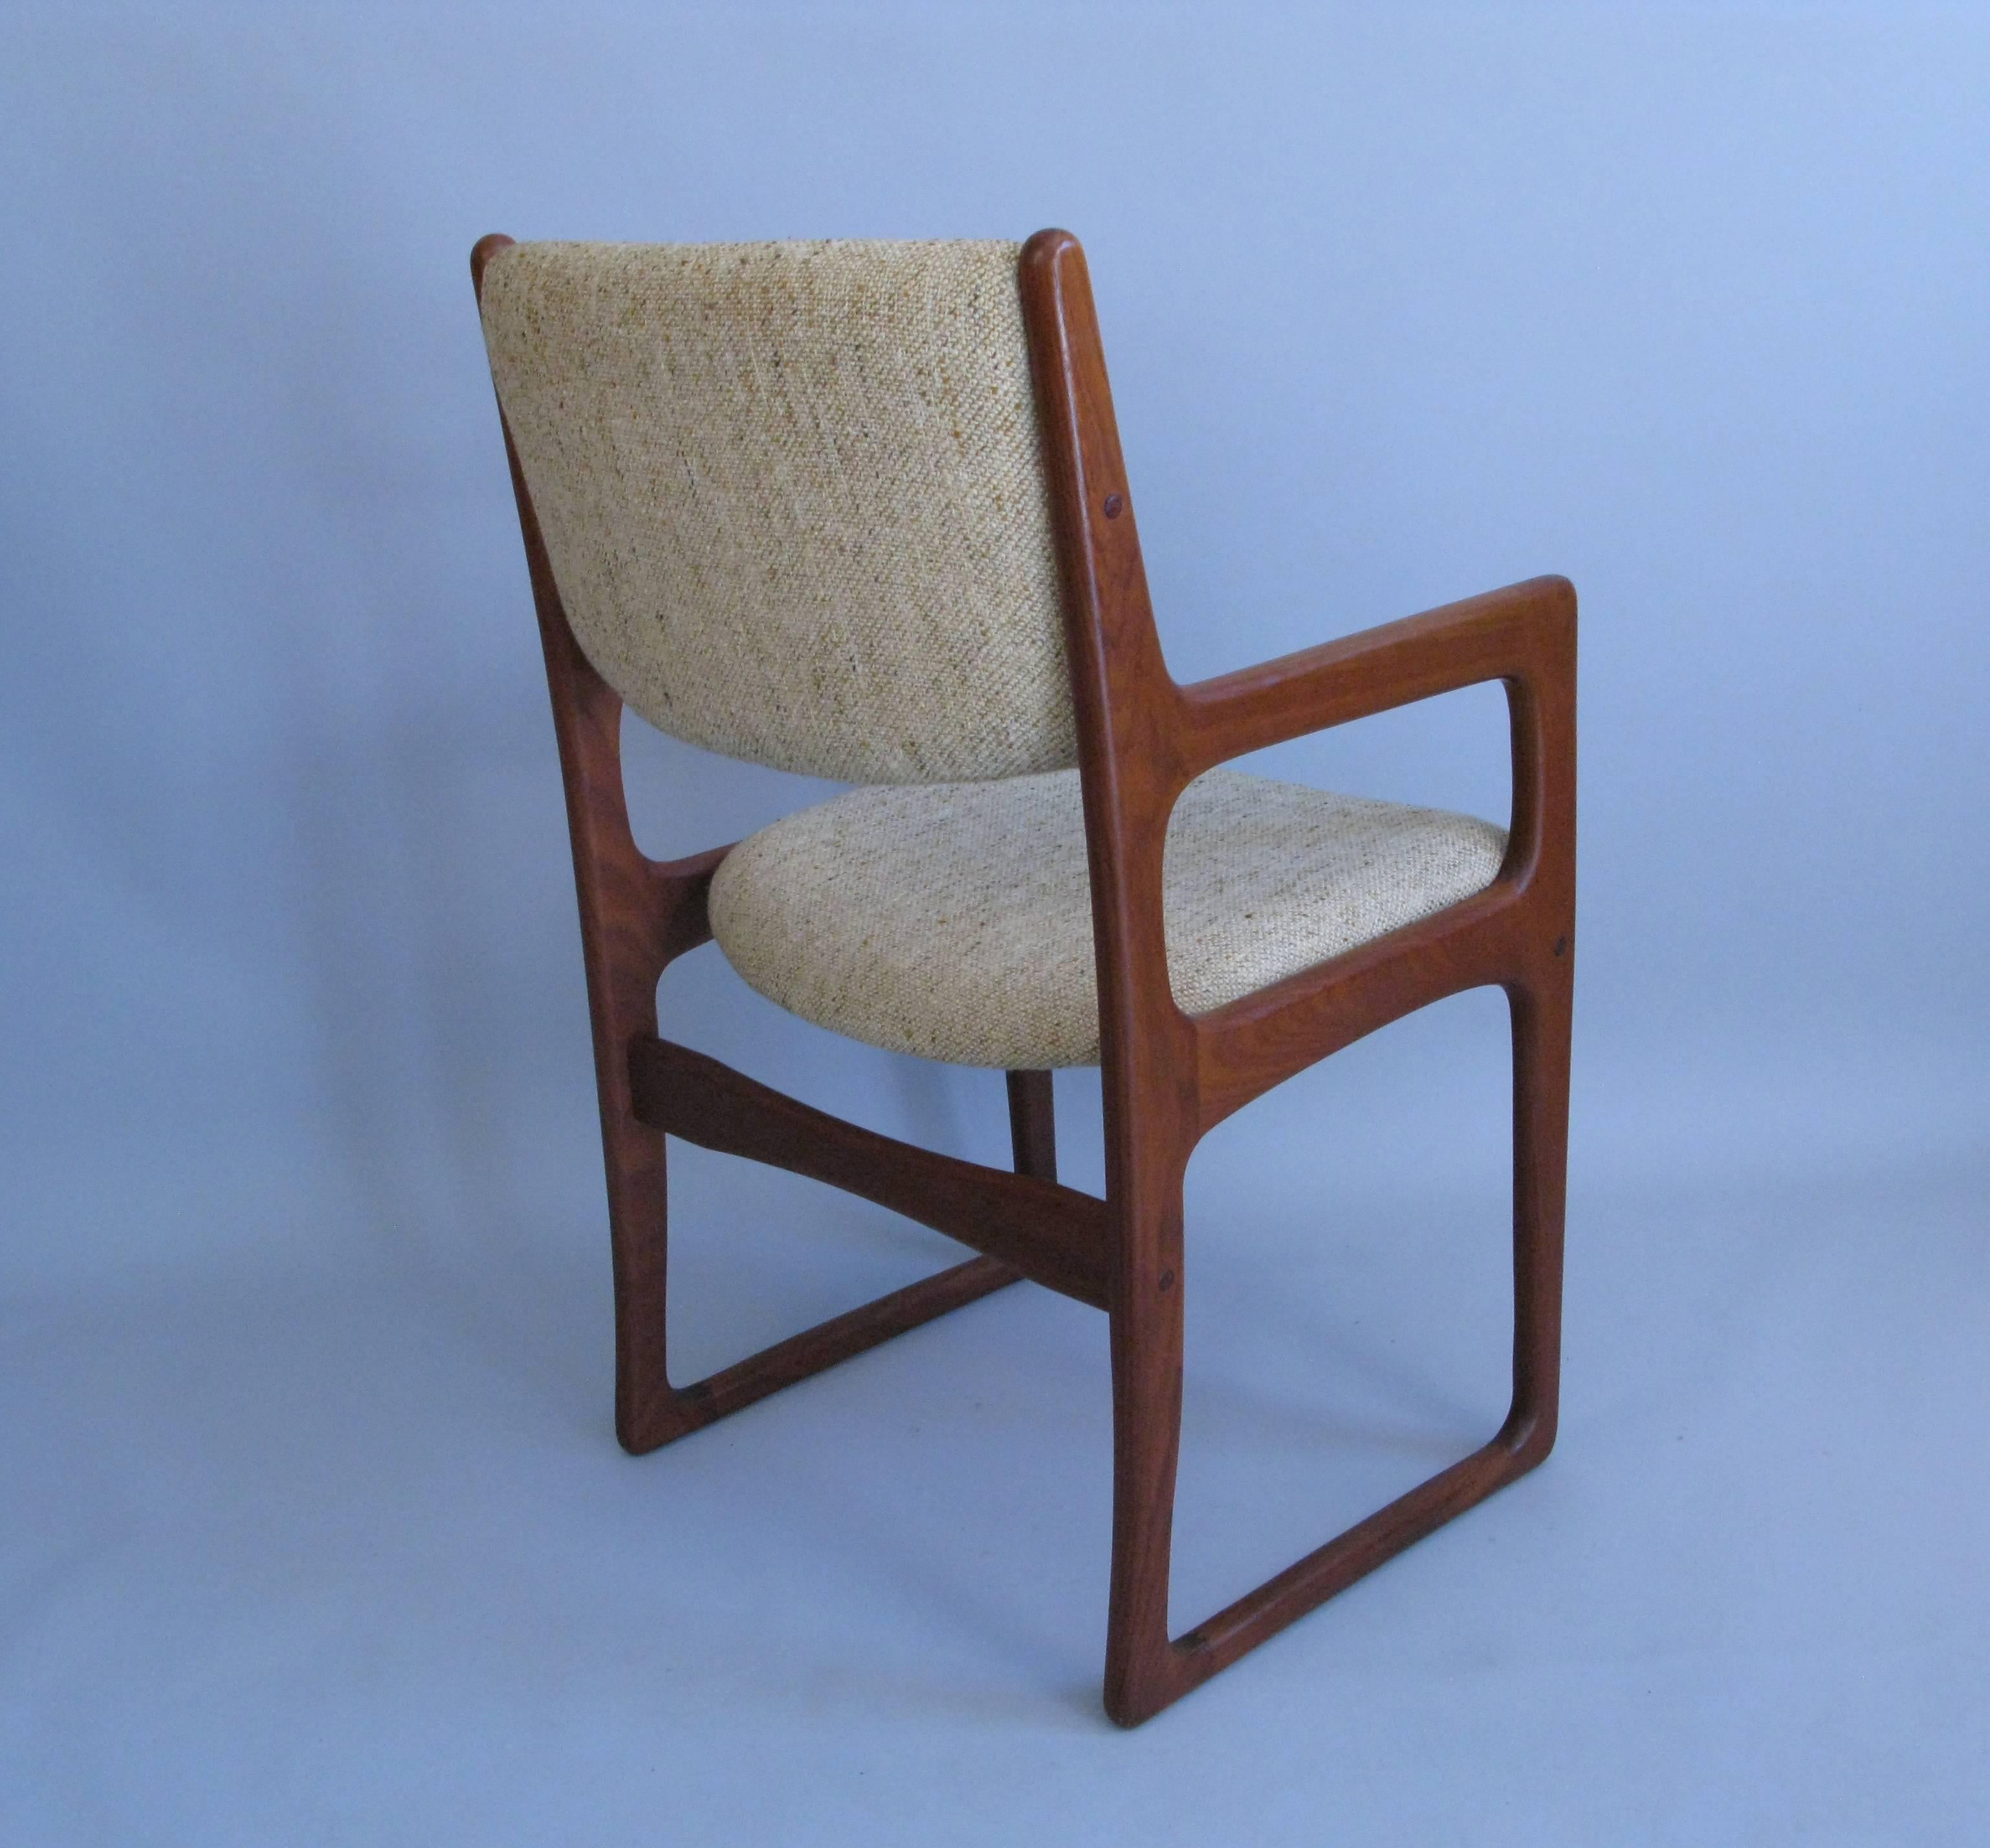 Woodwork Set of Six 1960s Danish Design Chairs by Benny Linden